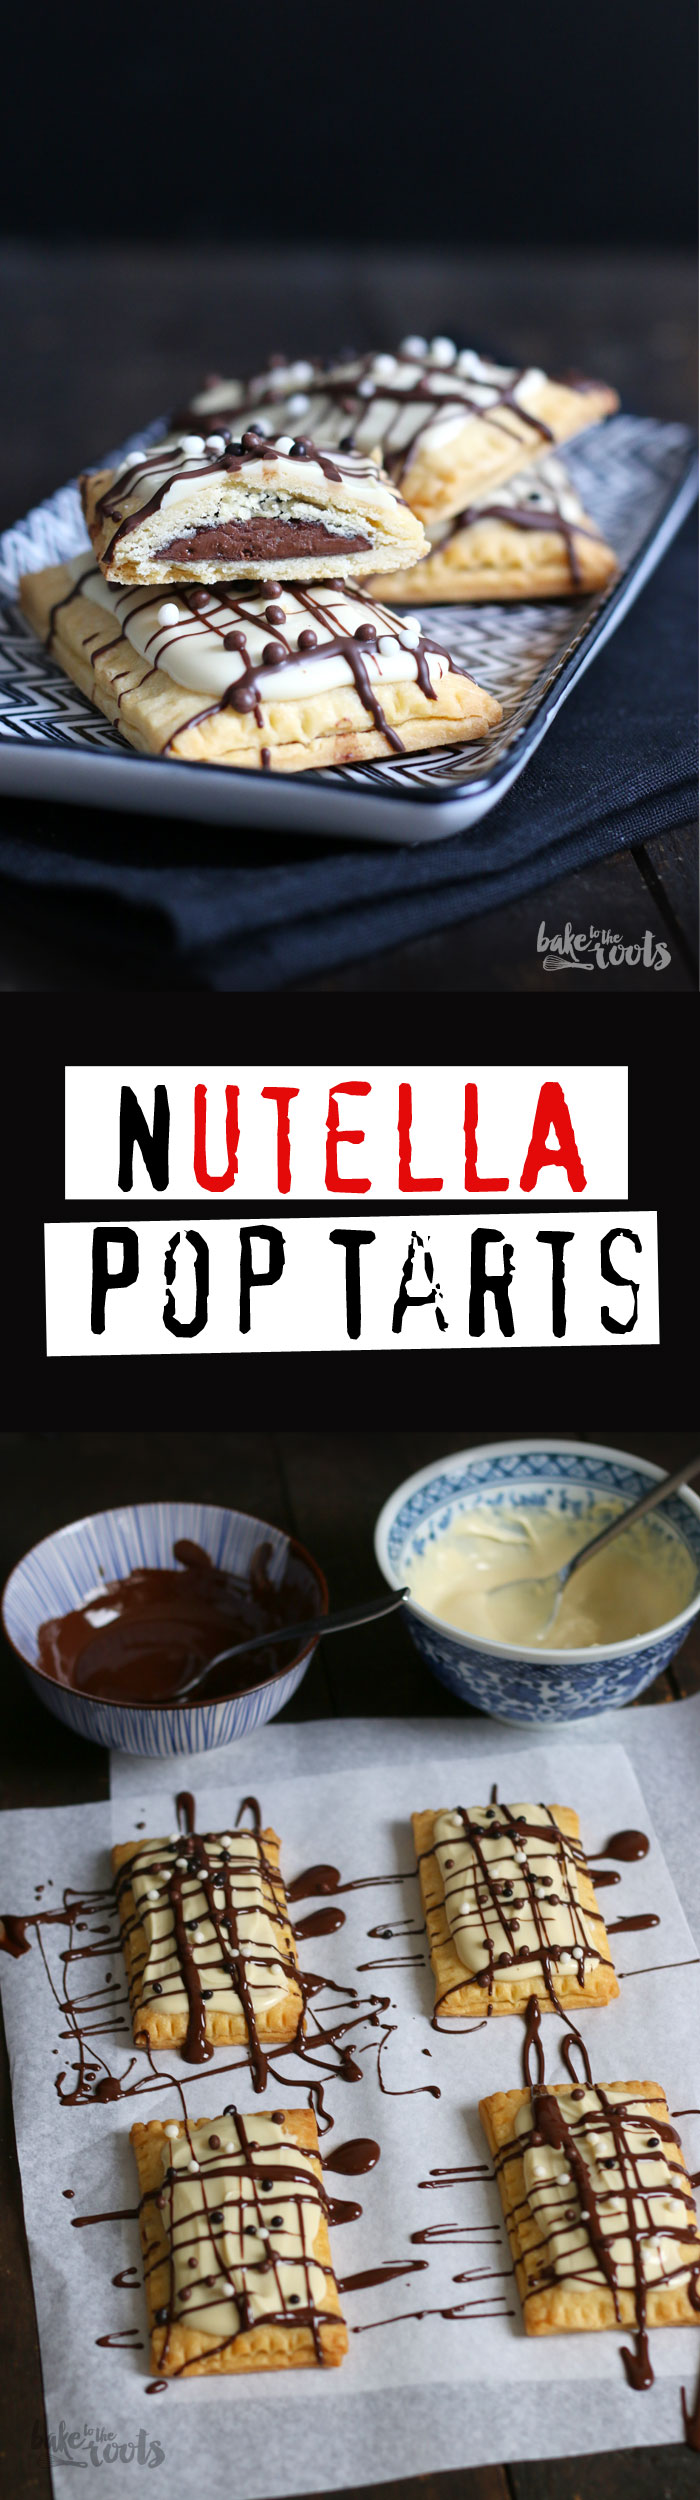 Delicious little Nutella Pop Tarts | Bake to the roots